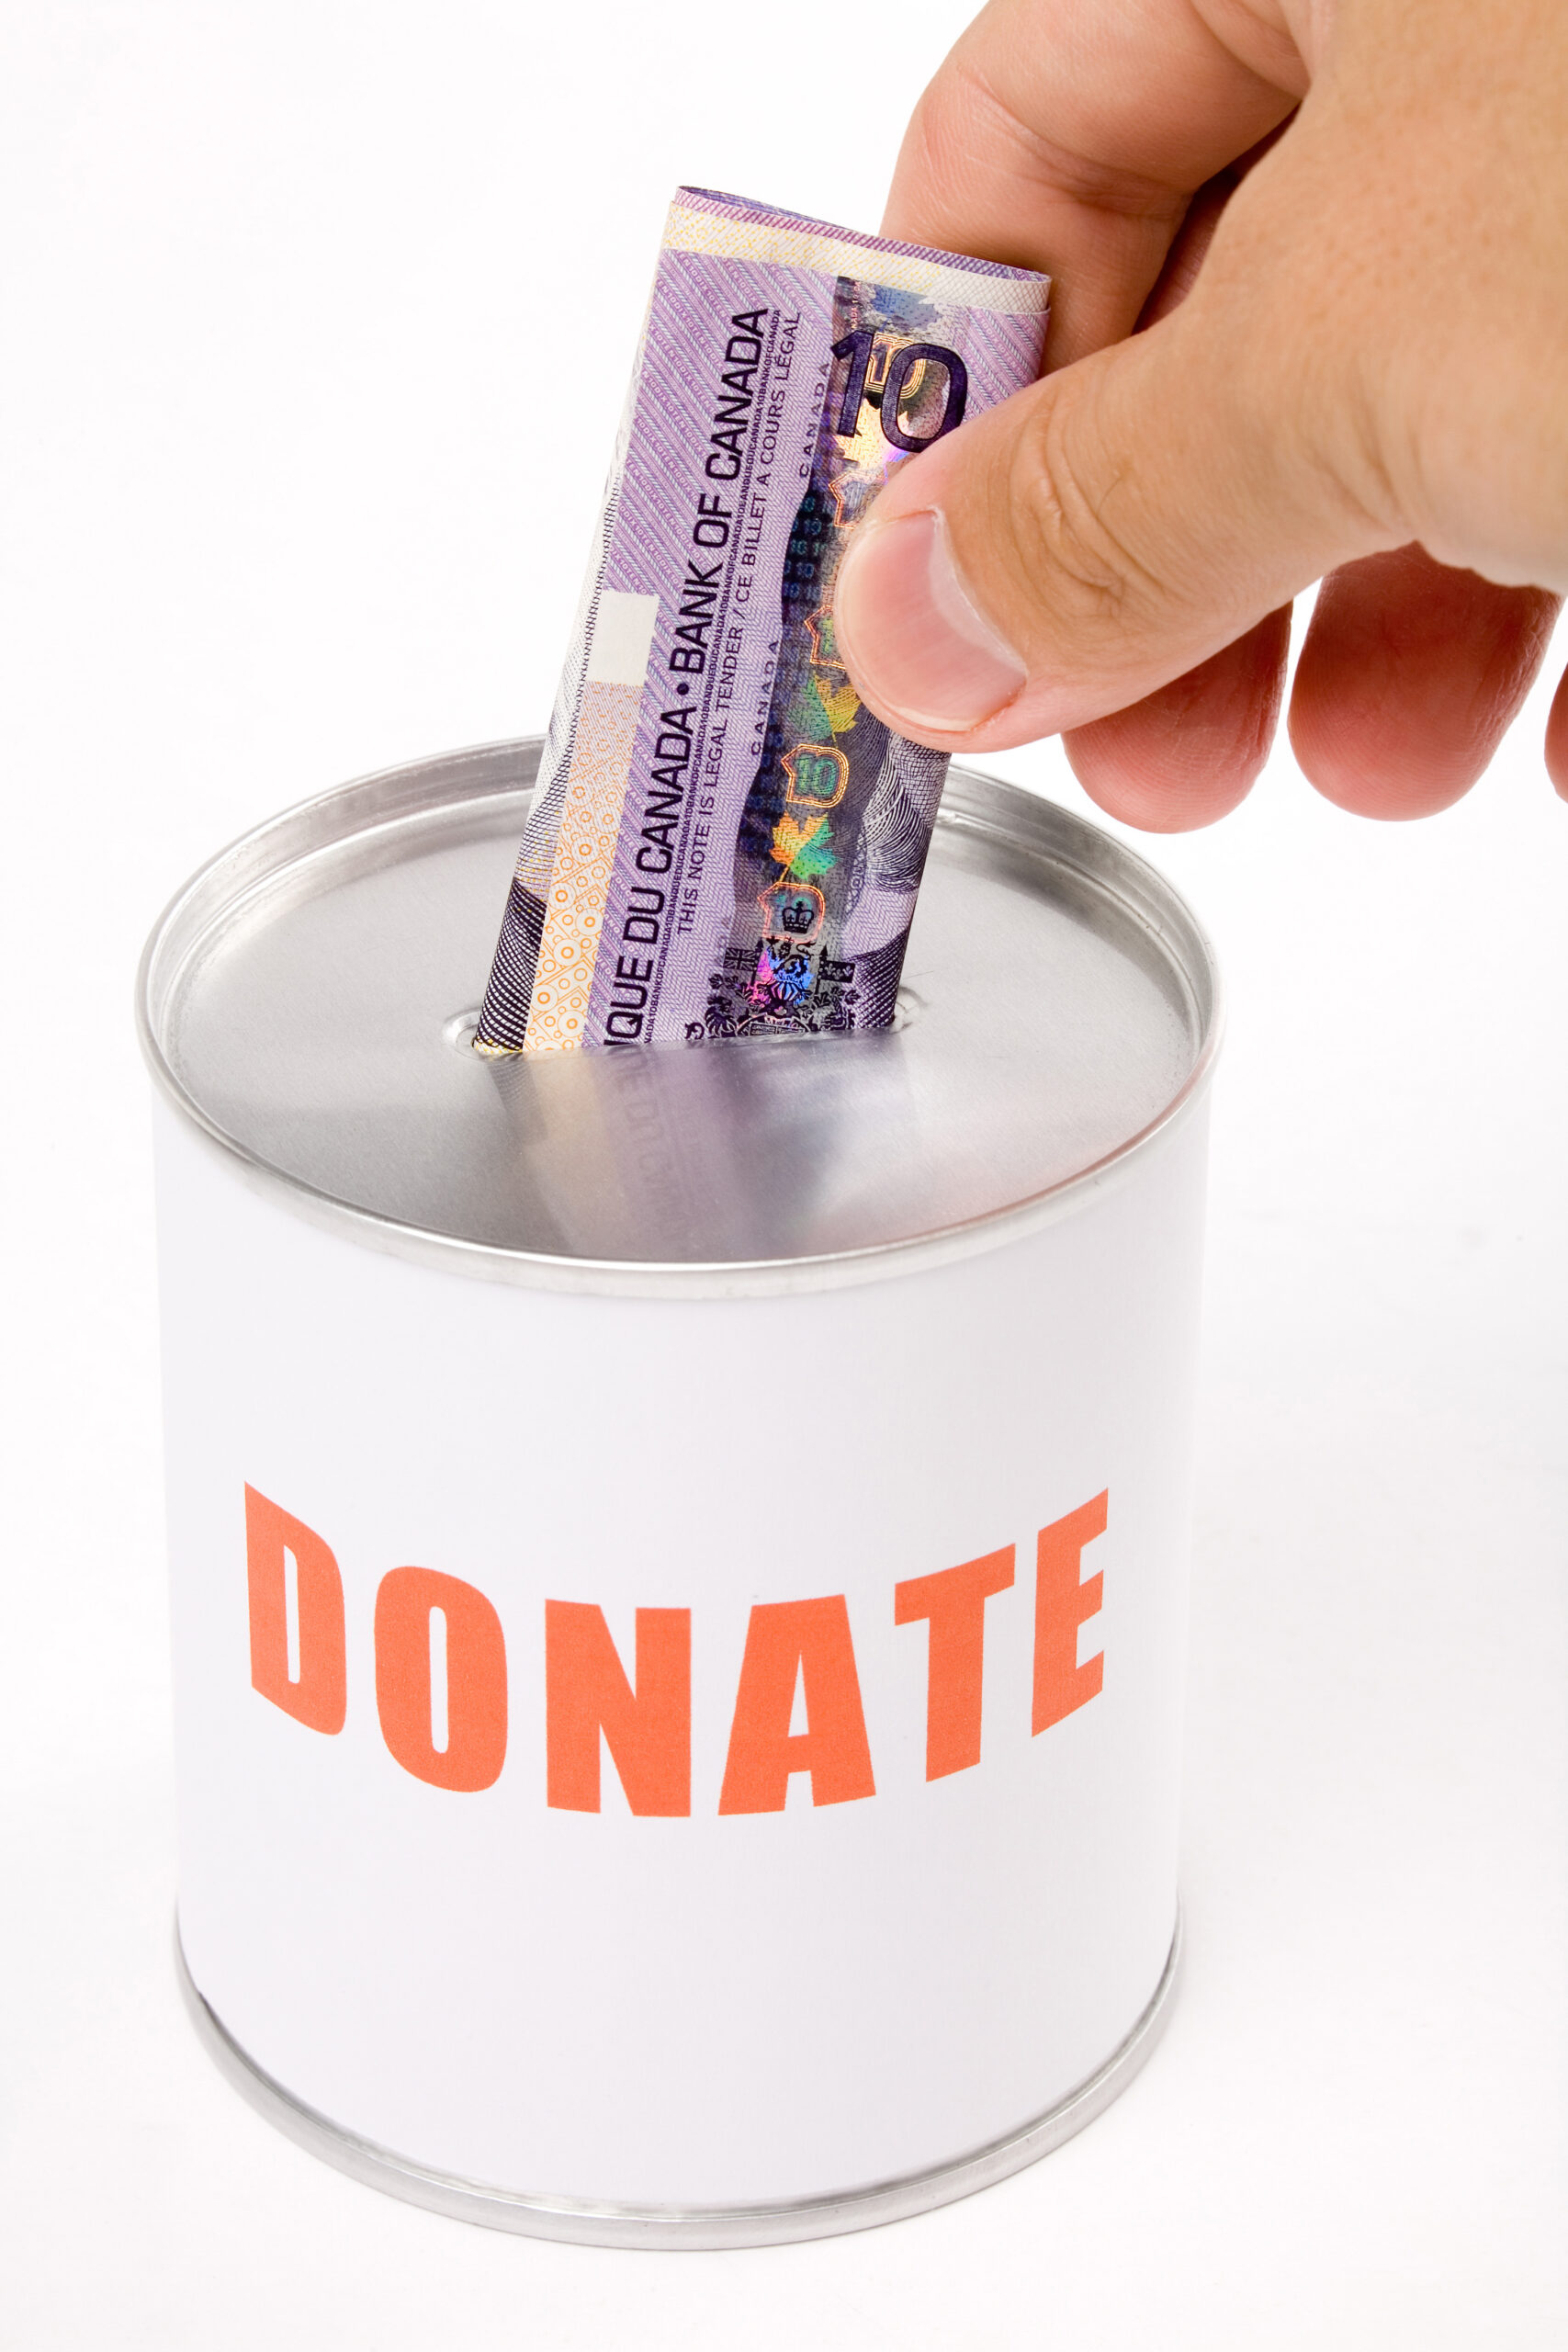 A ten dollar bill being placed into a can that reads "DONATE."